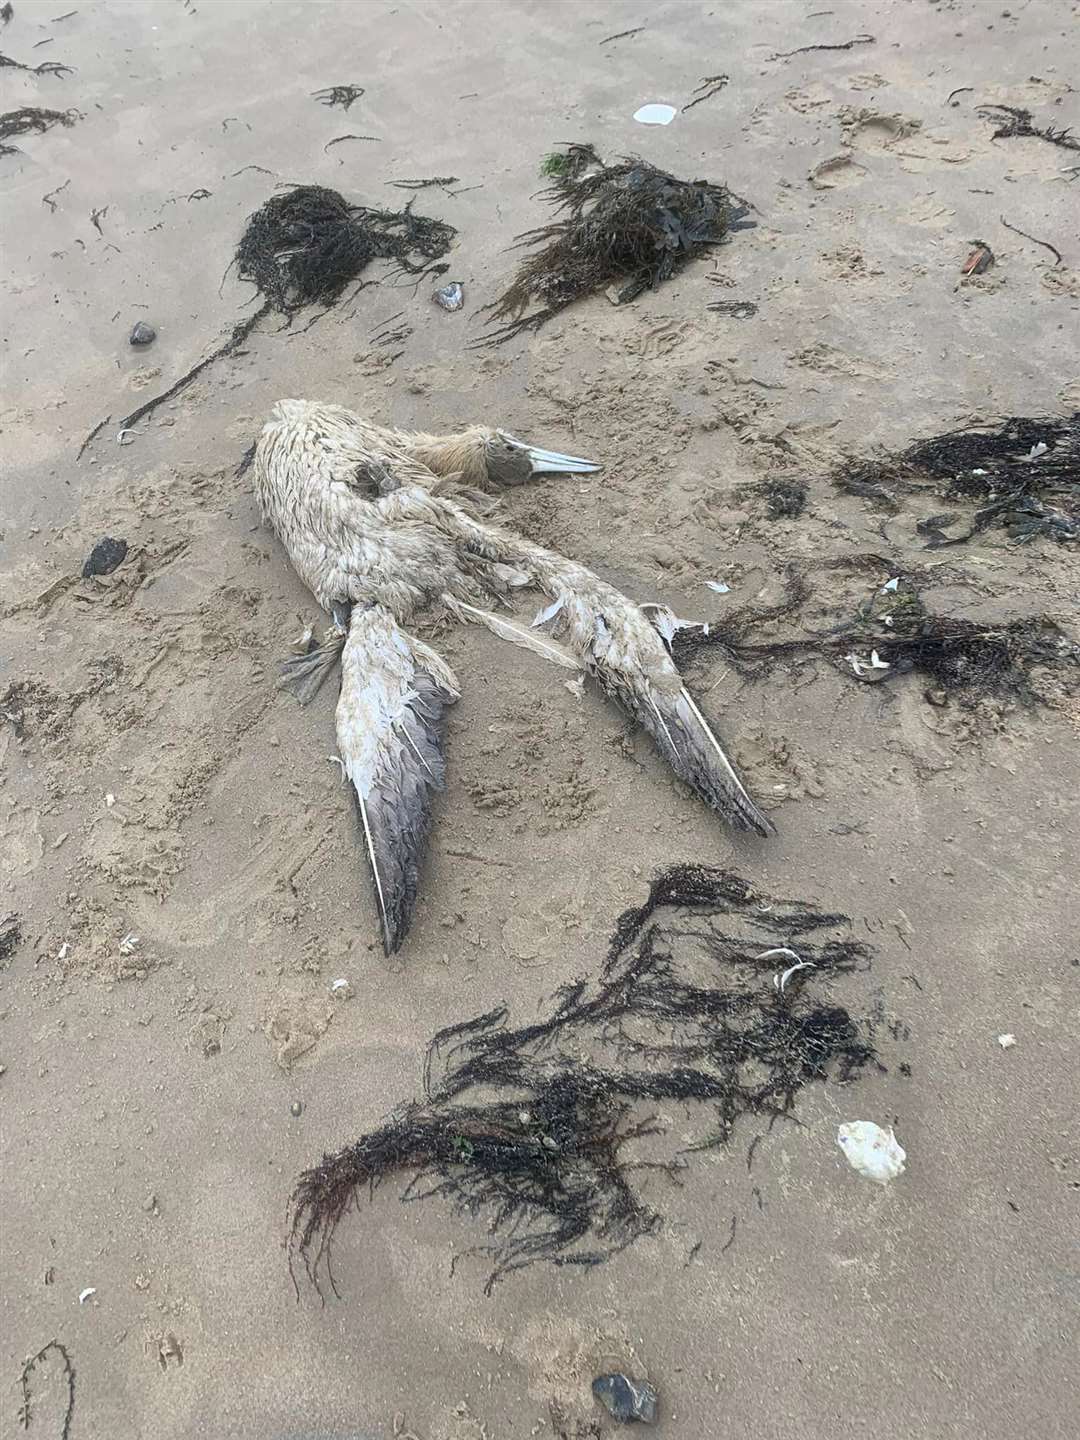 The remains of a gannet